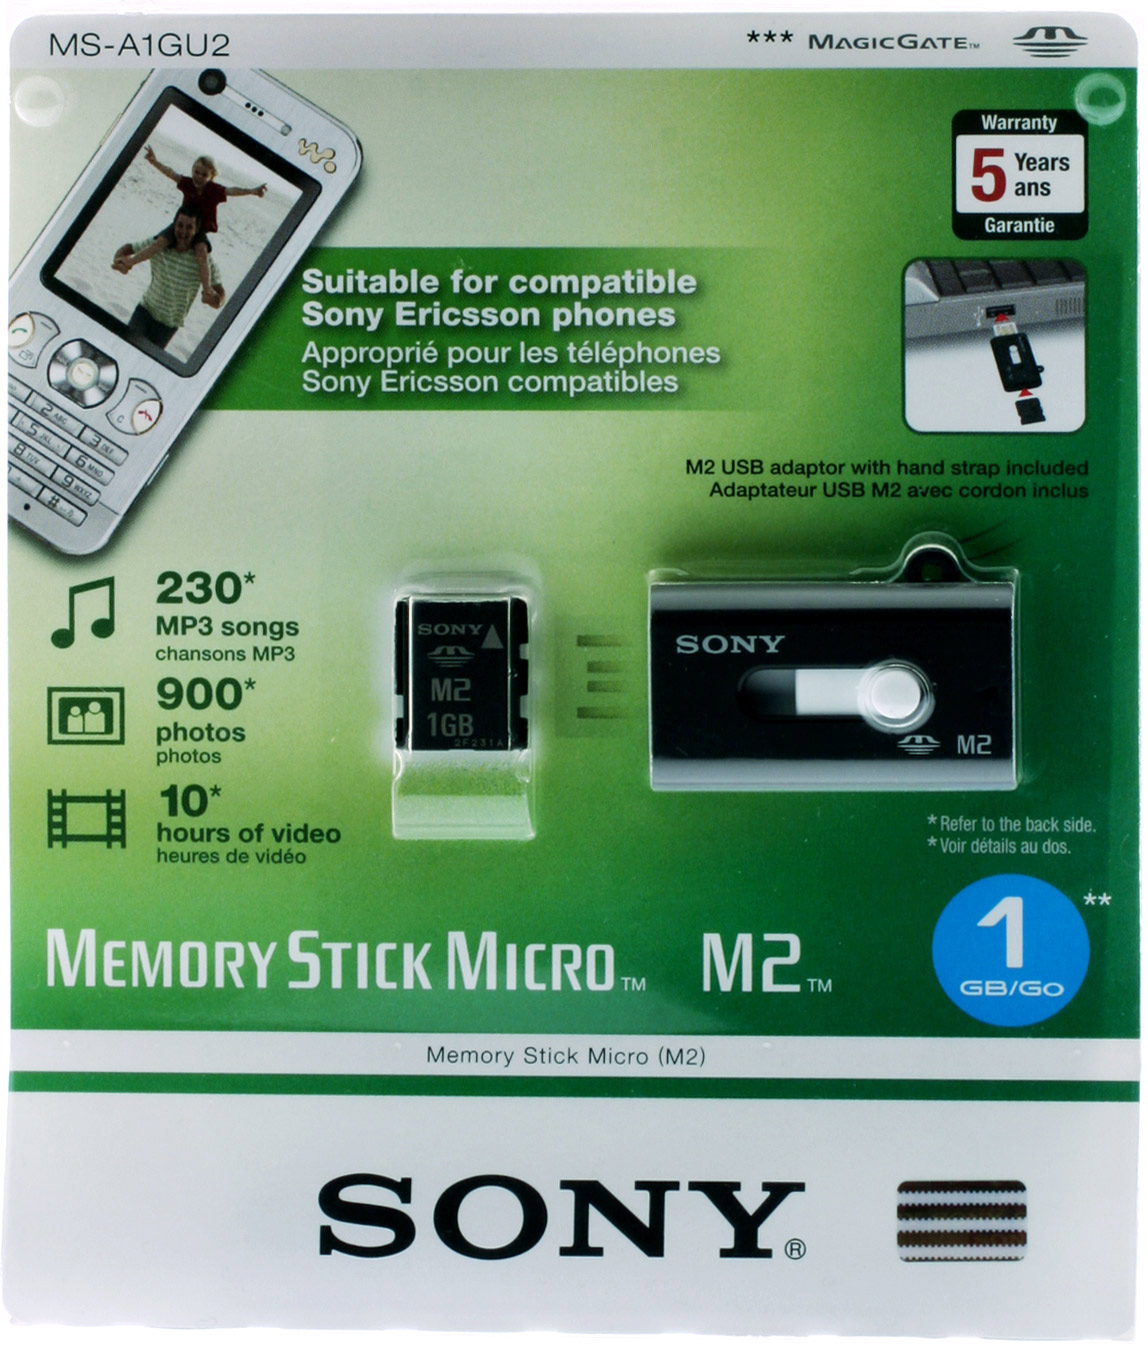 Unbranded Memory Stick Micro M2 For Sony With Compact USB Reader/Writer - 1GB - Sony